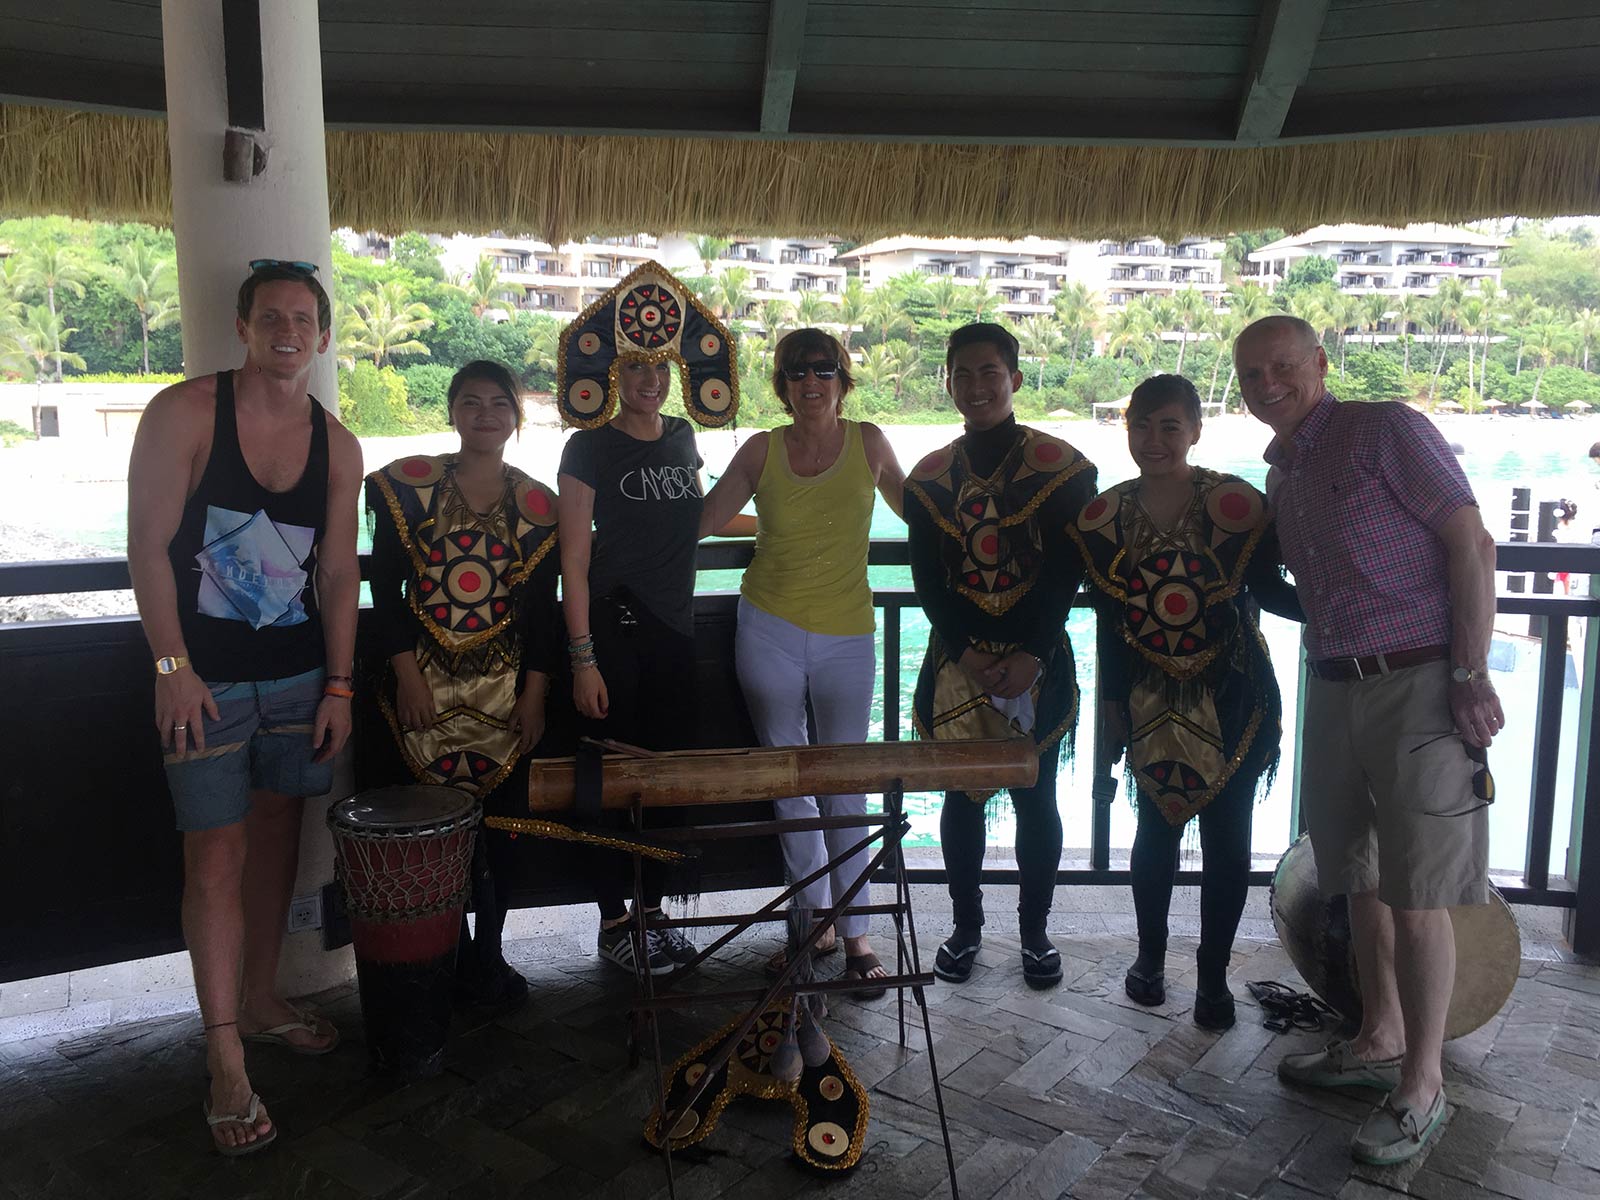 David Simpson and family with local tribal dancers in Boracay, Philippines. A week at the Shangri-La Resort, Boracay